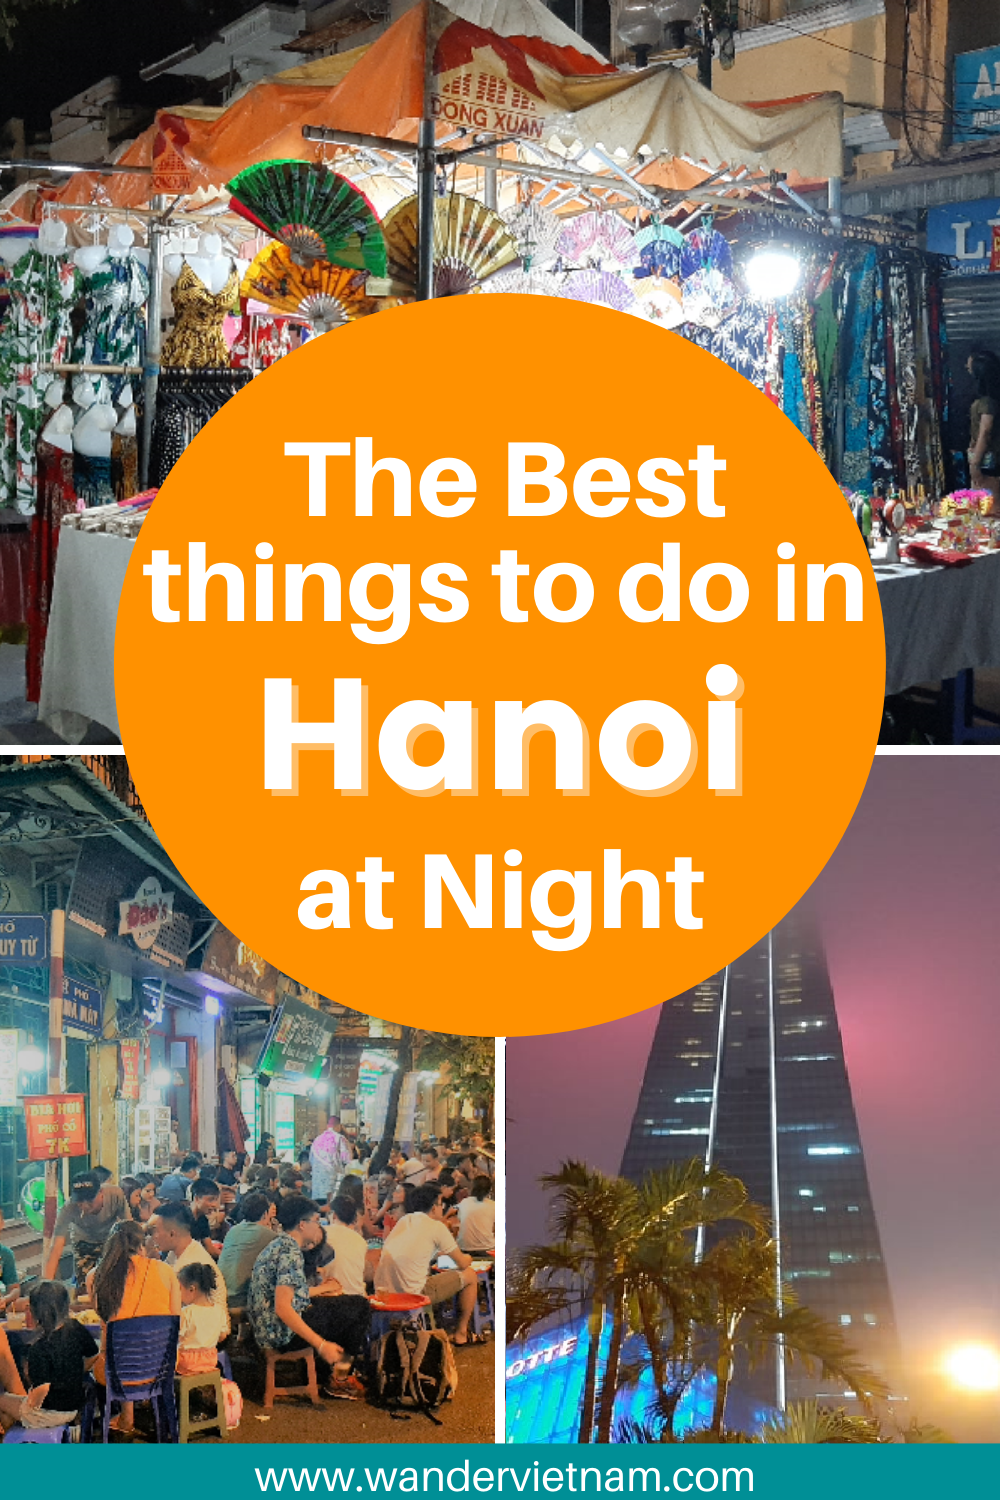 The Best Things to do in Hanoi at Night